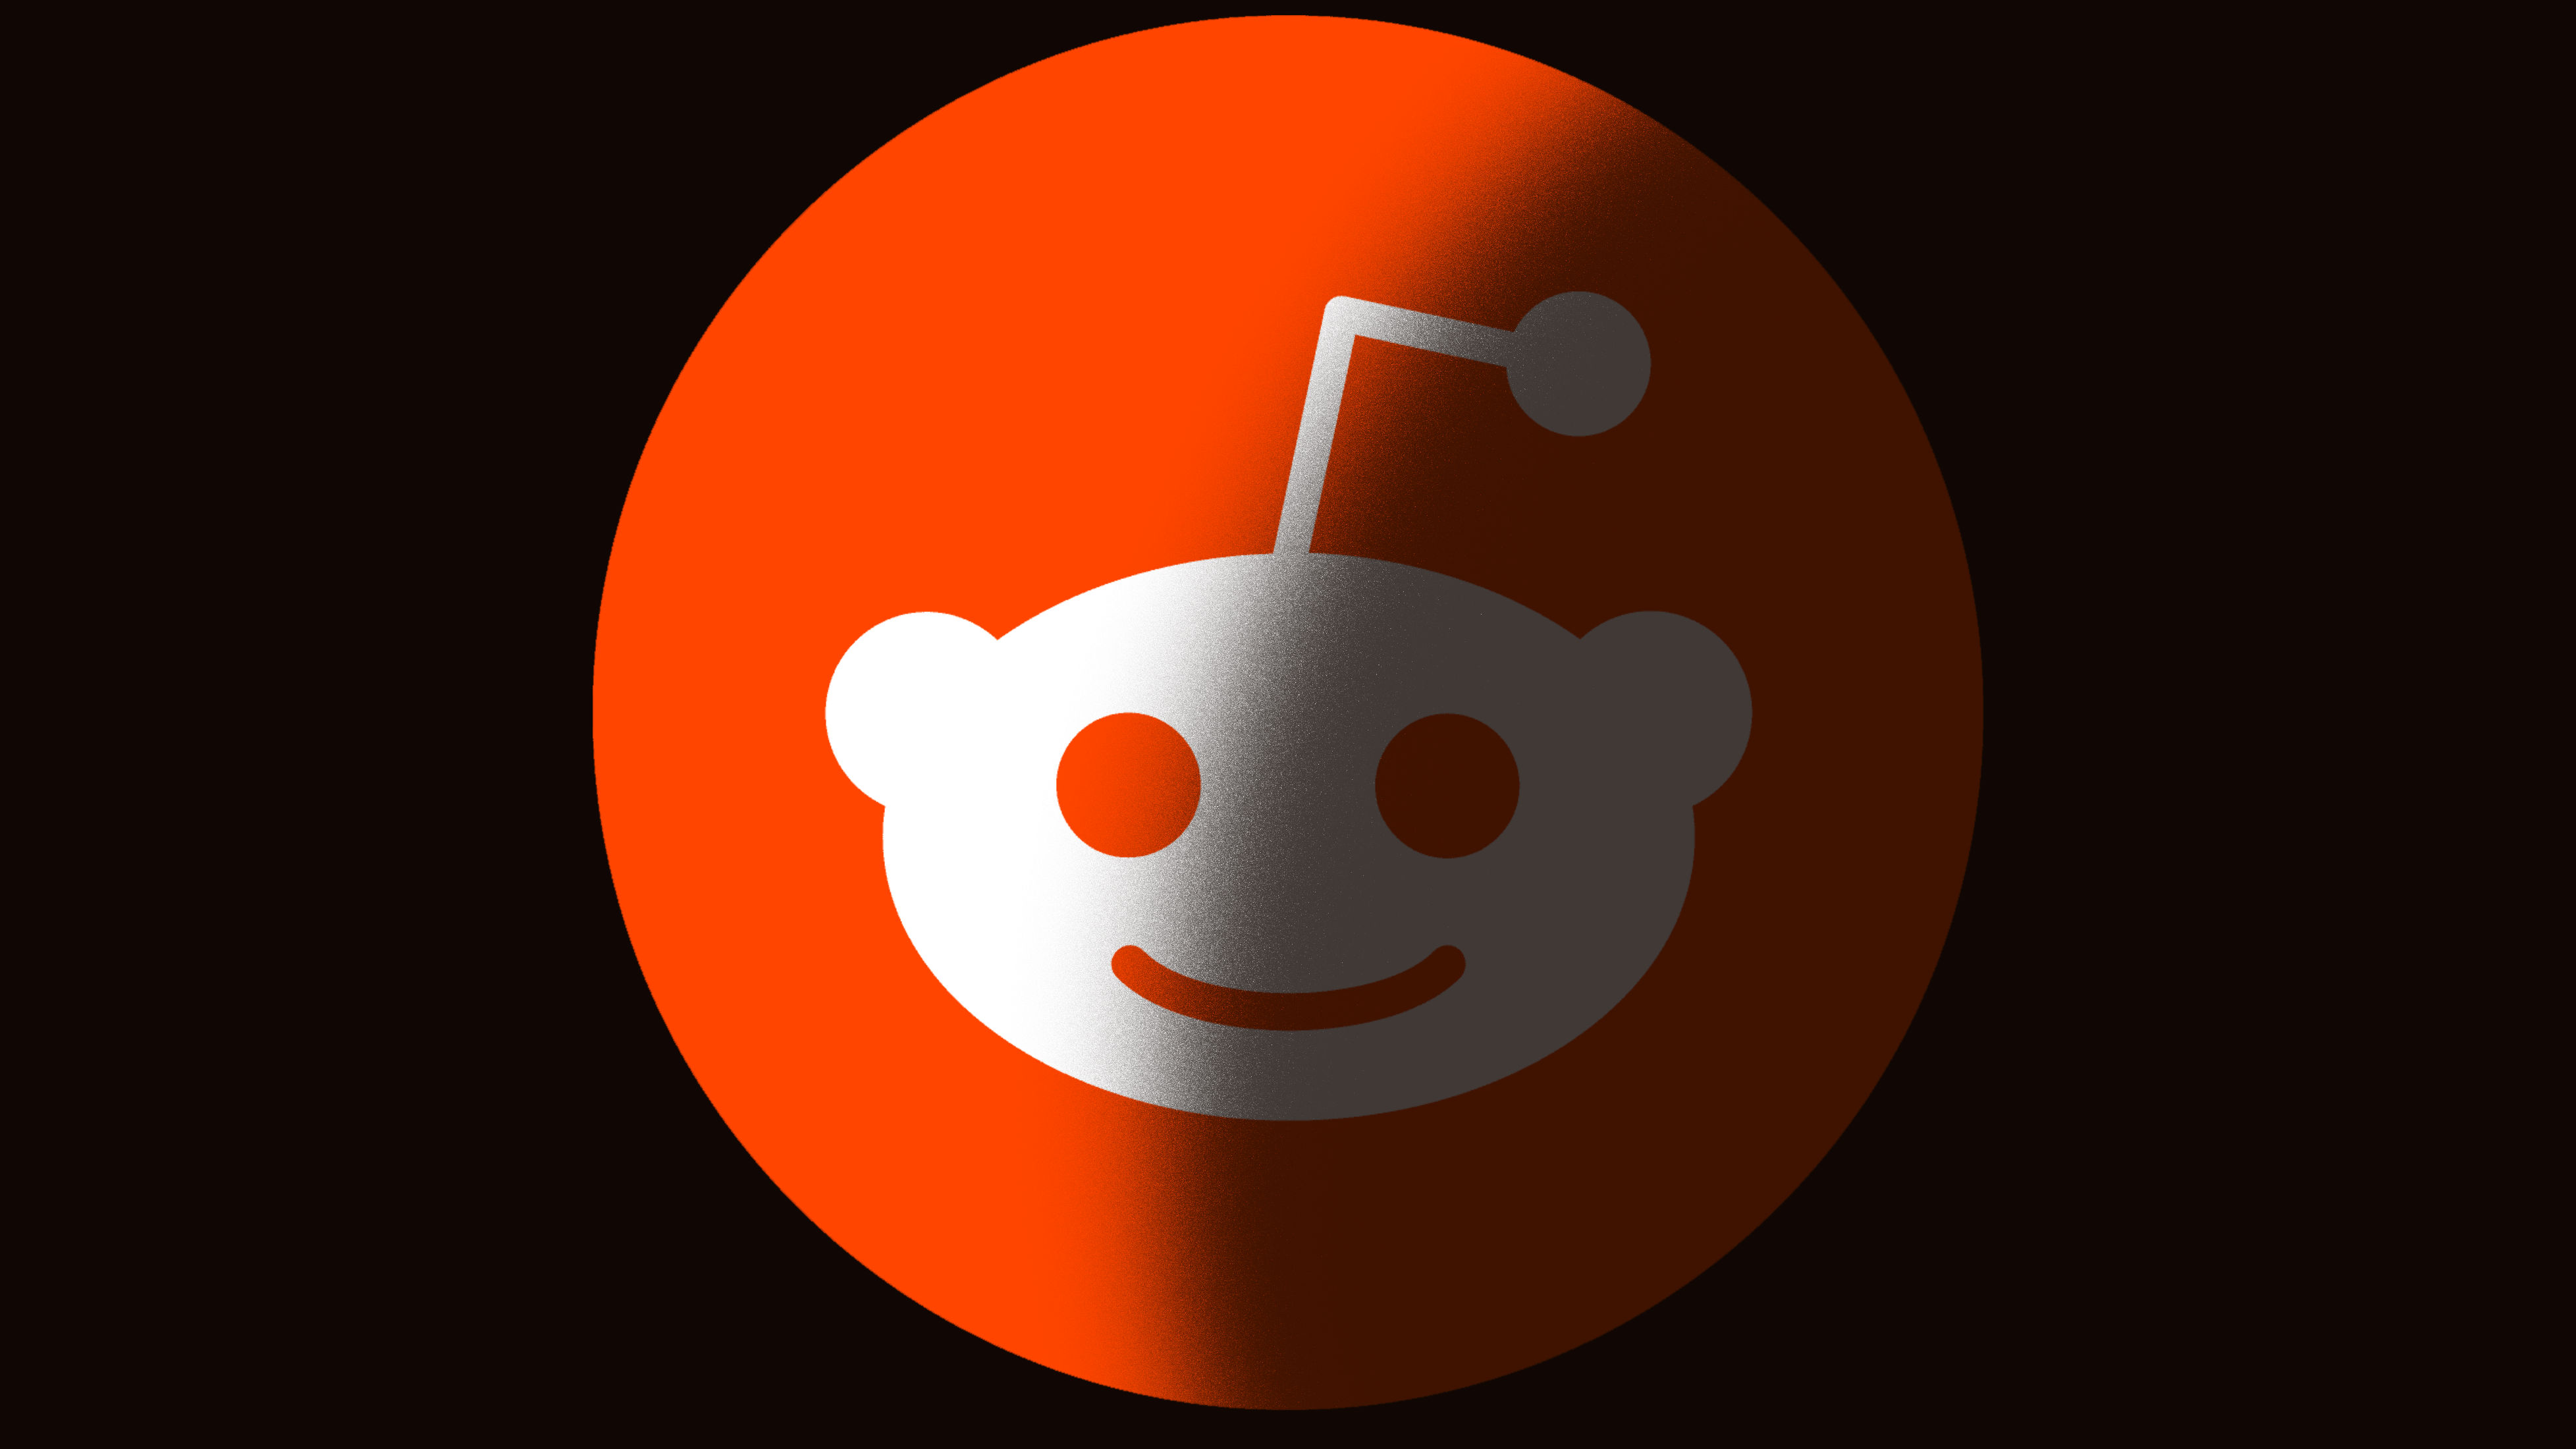 Reddit is reportedly in the middle of a licensing deal worth "about $60 million on an annualized basis," which could potentially allow an anonymous and large AI company to train its models using content from subreddits